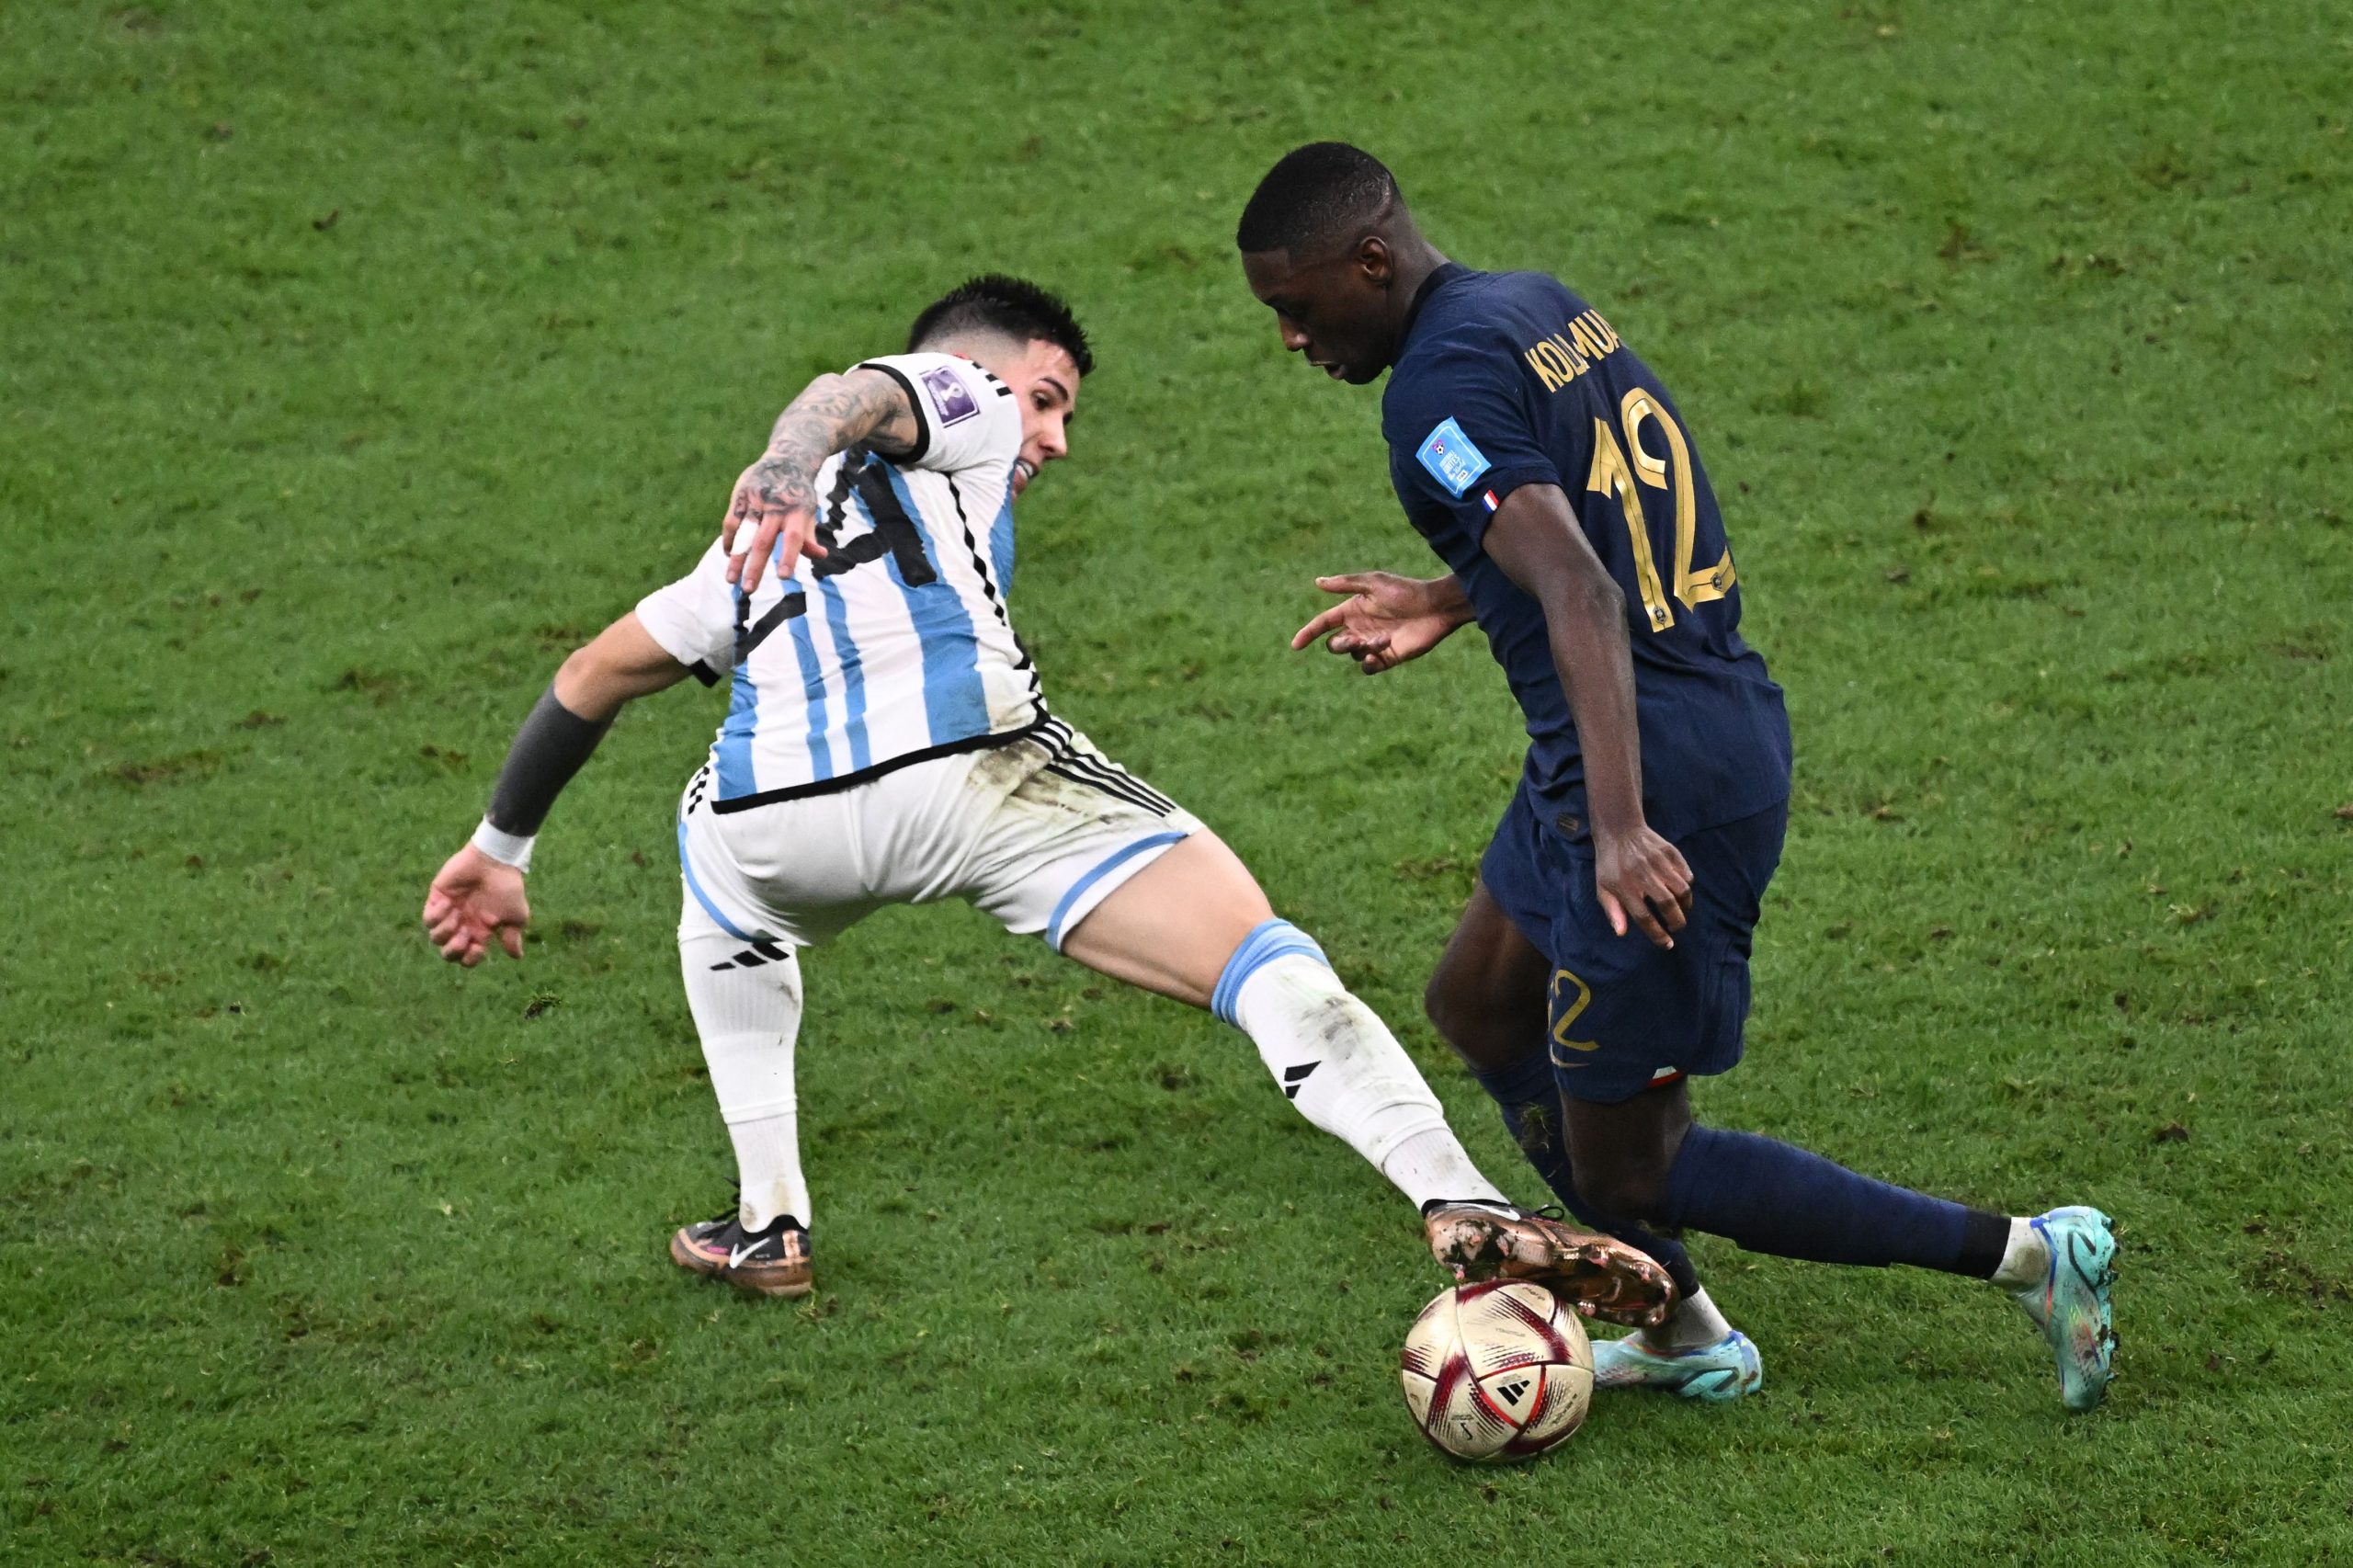 Argentina's Enzo Fernandez battles for possession with Randal Kolo Muani of France. (Photo by JEWEL SAMAD/AFP via Getty Images)